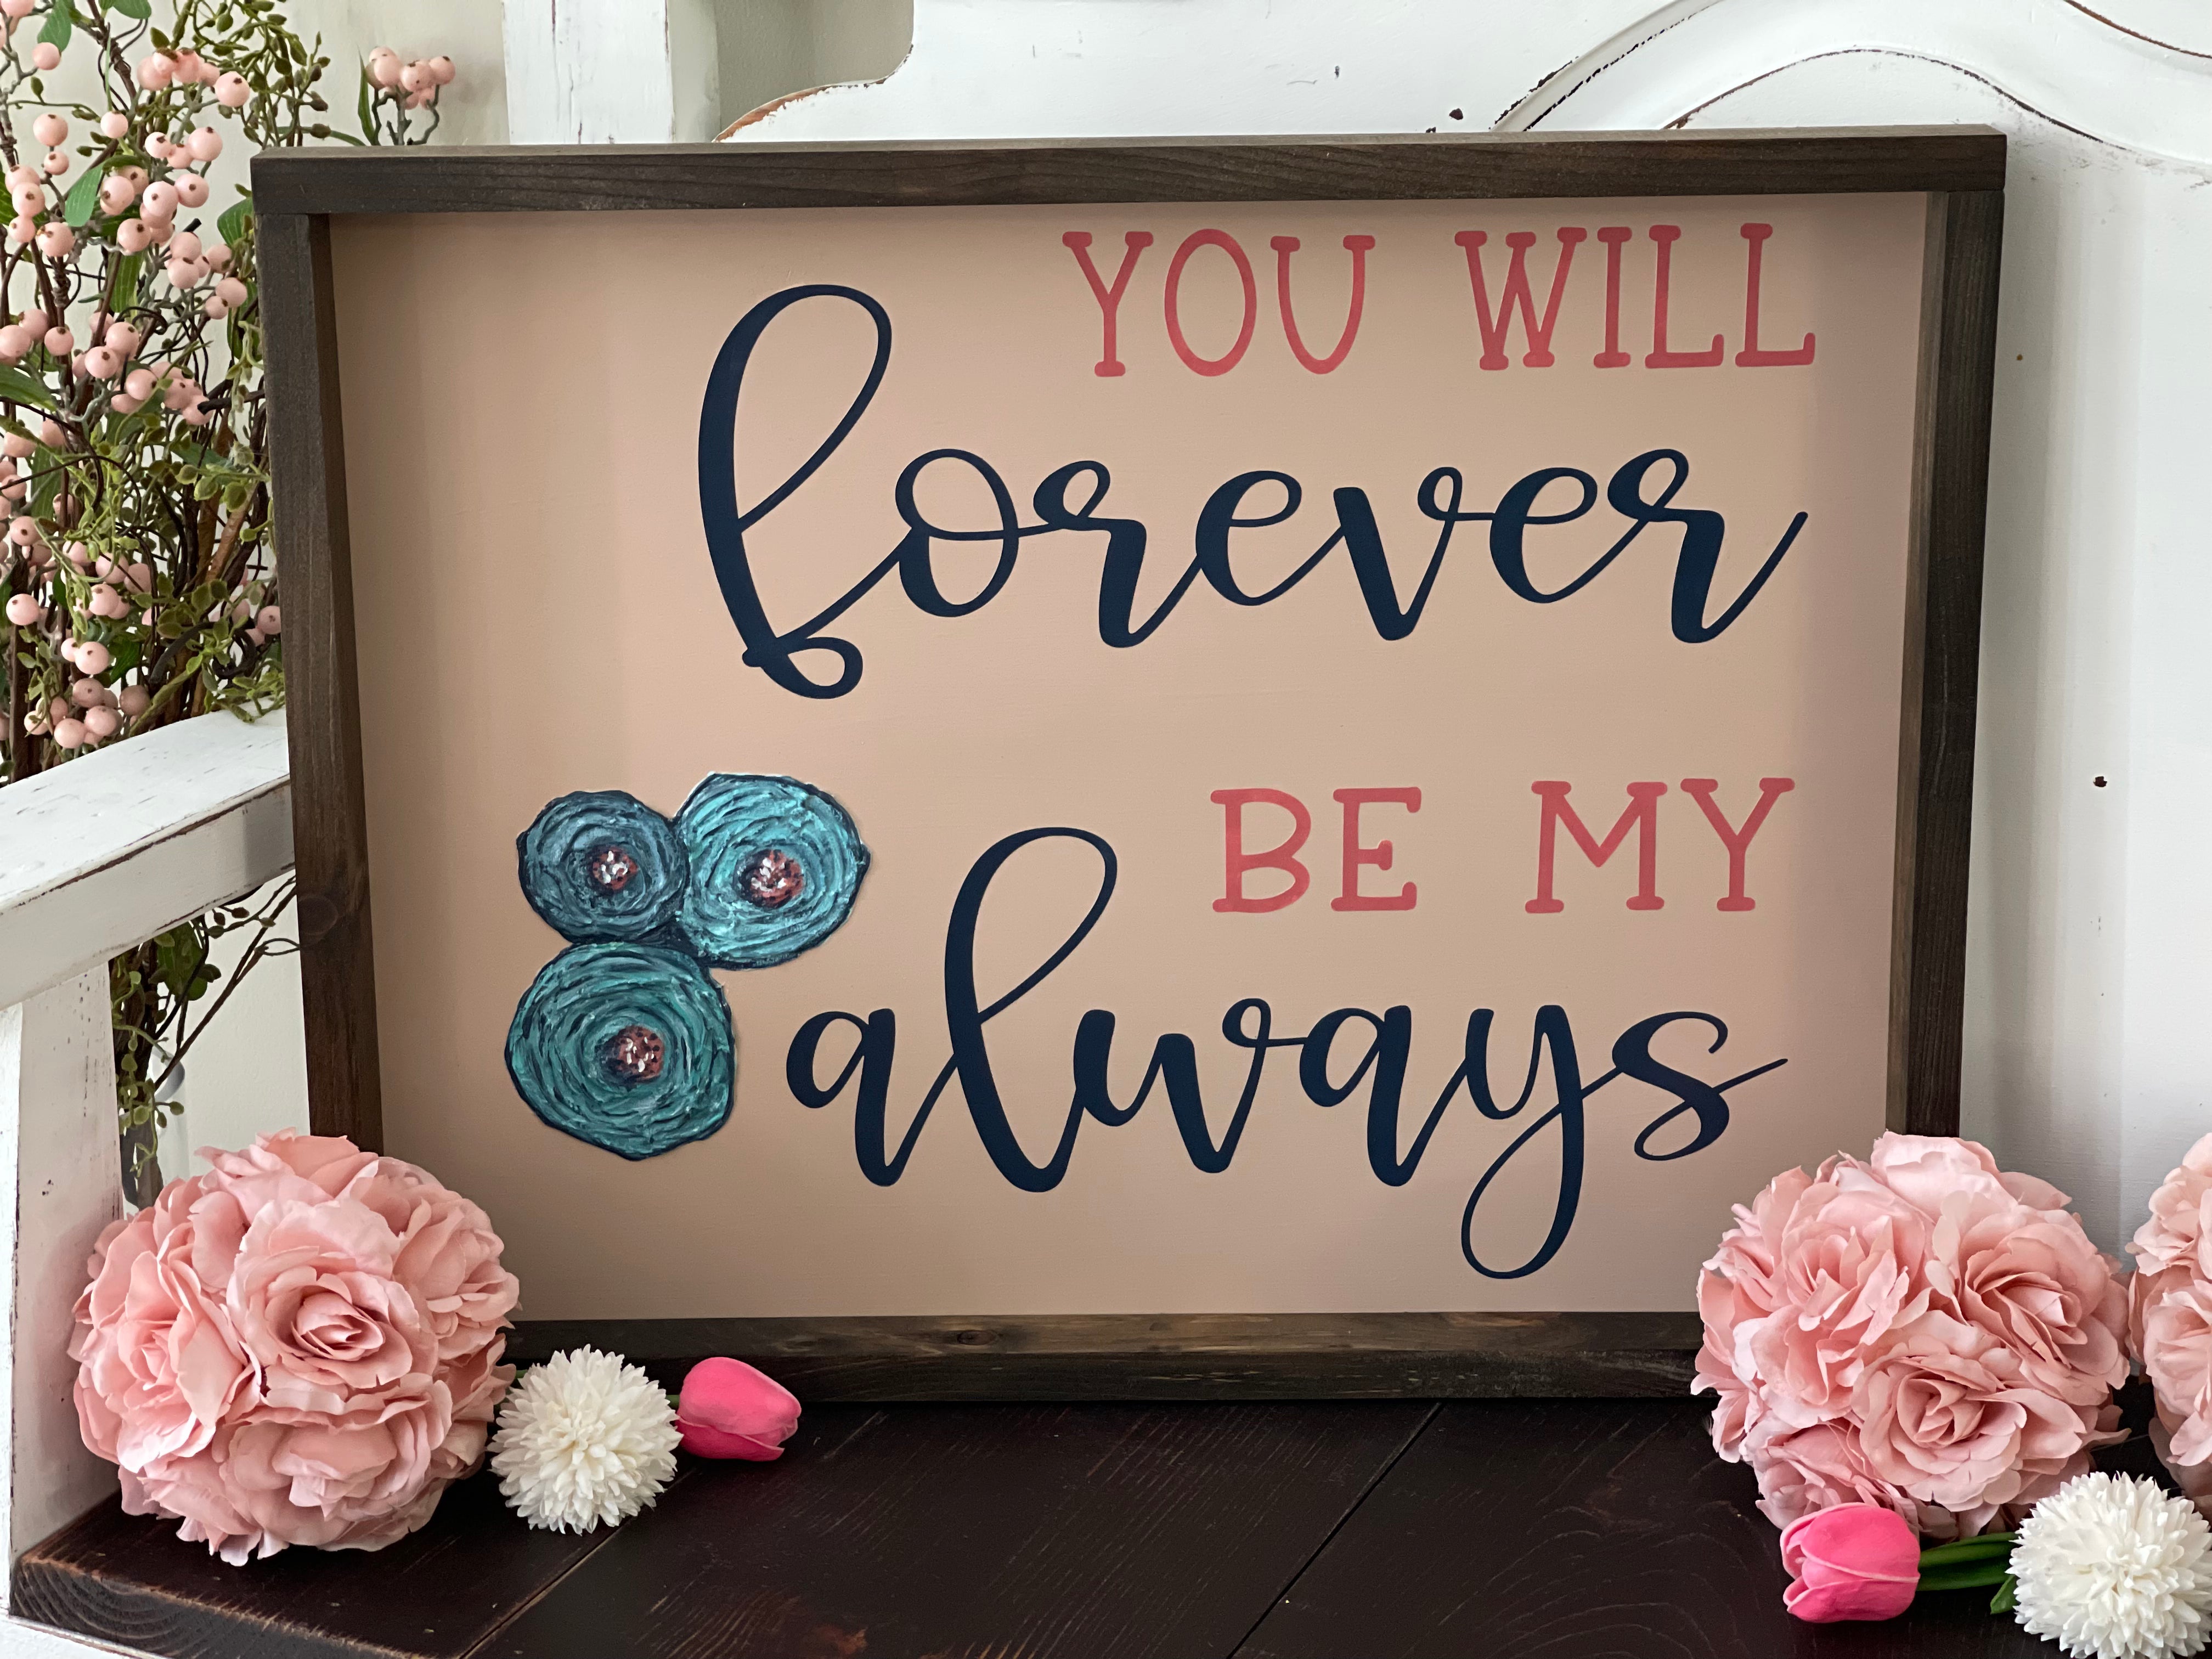 This sign has textured floral roses and hand painted lettering.  